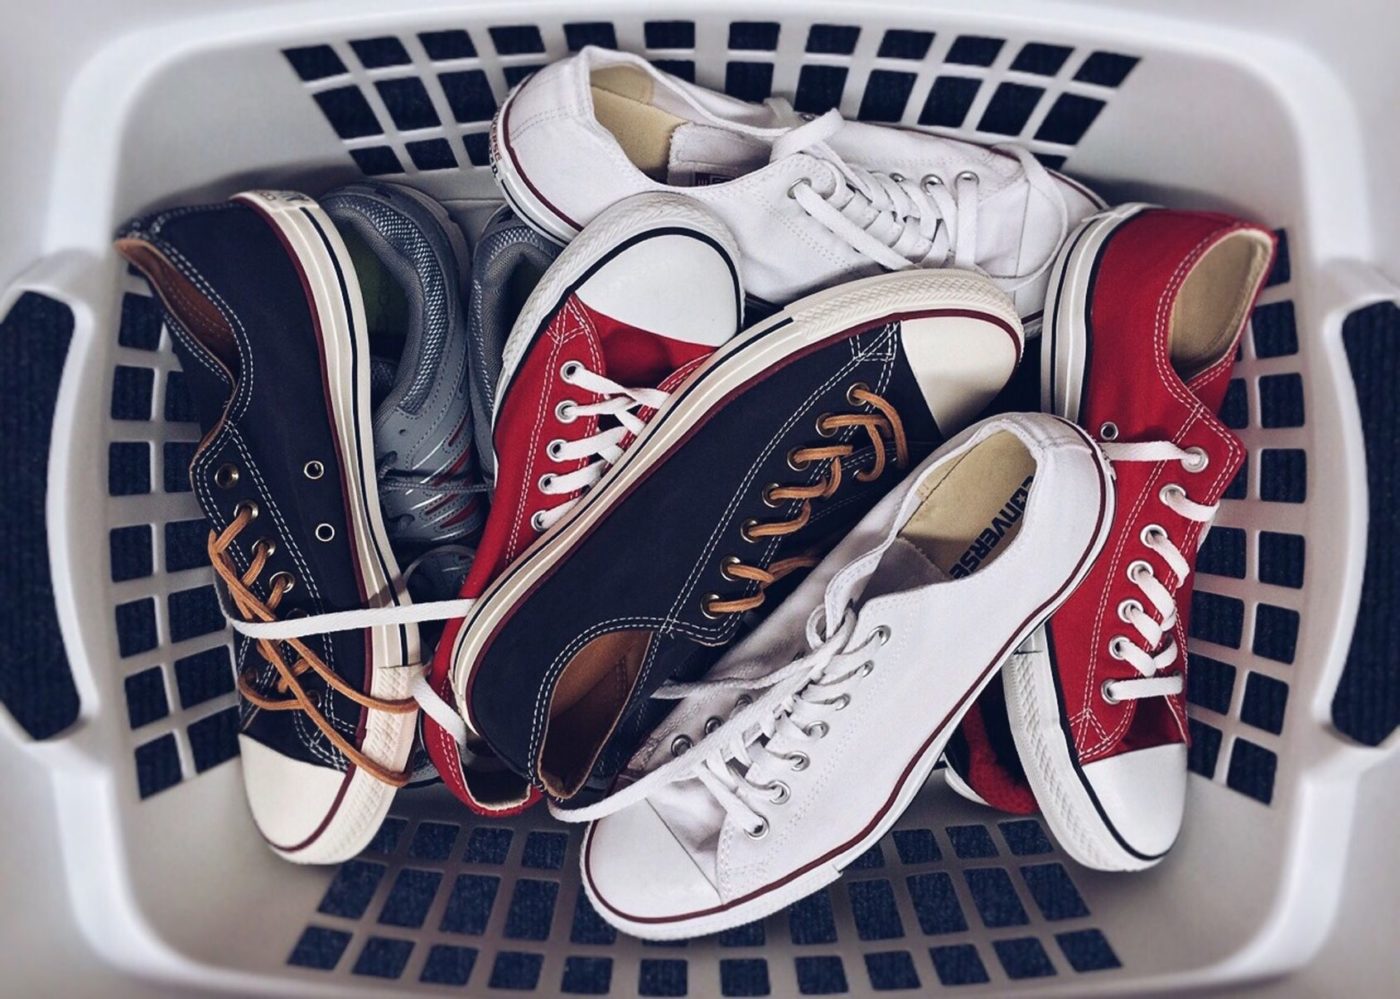 Shoes packed in the laundry basket before long-distance moving and auto transport